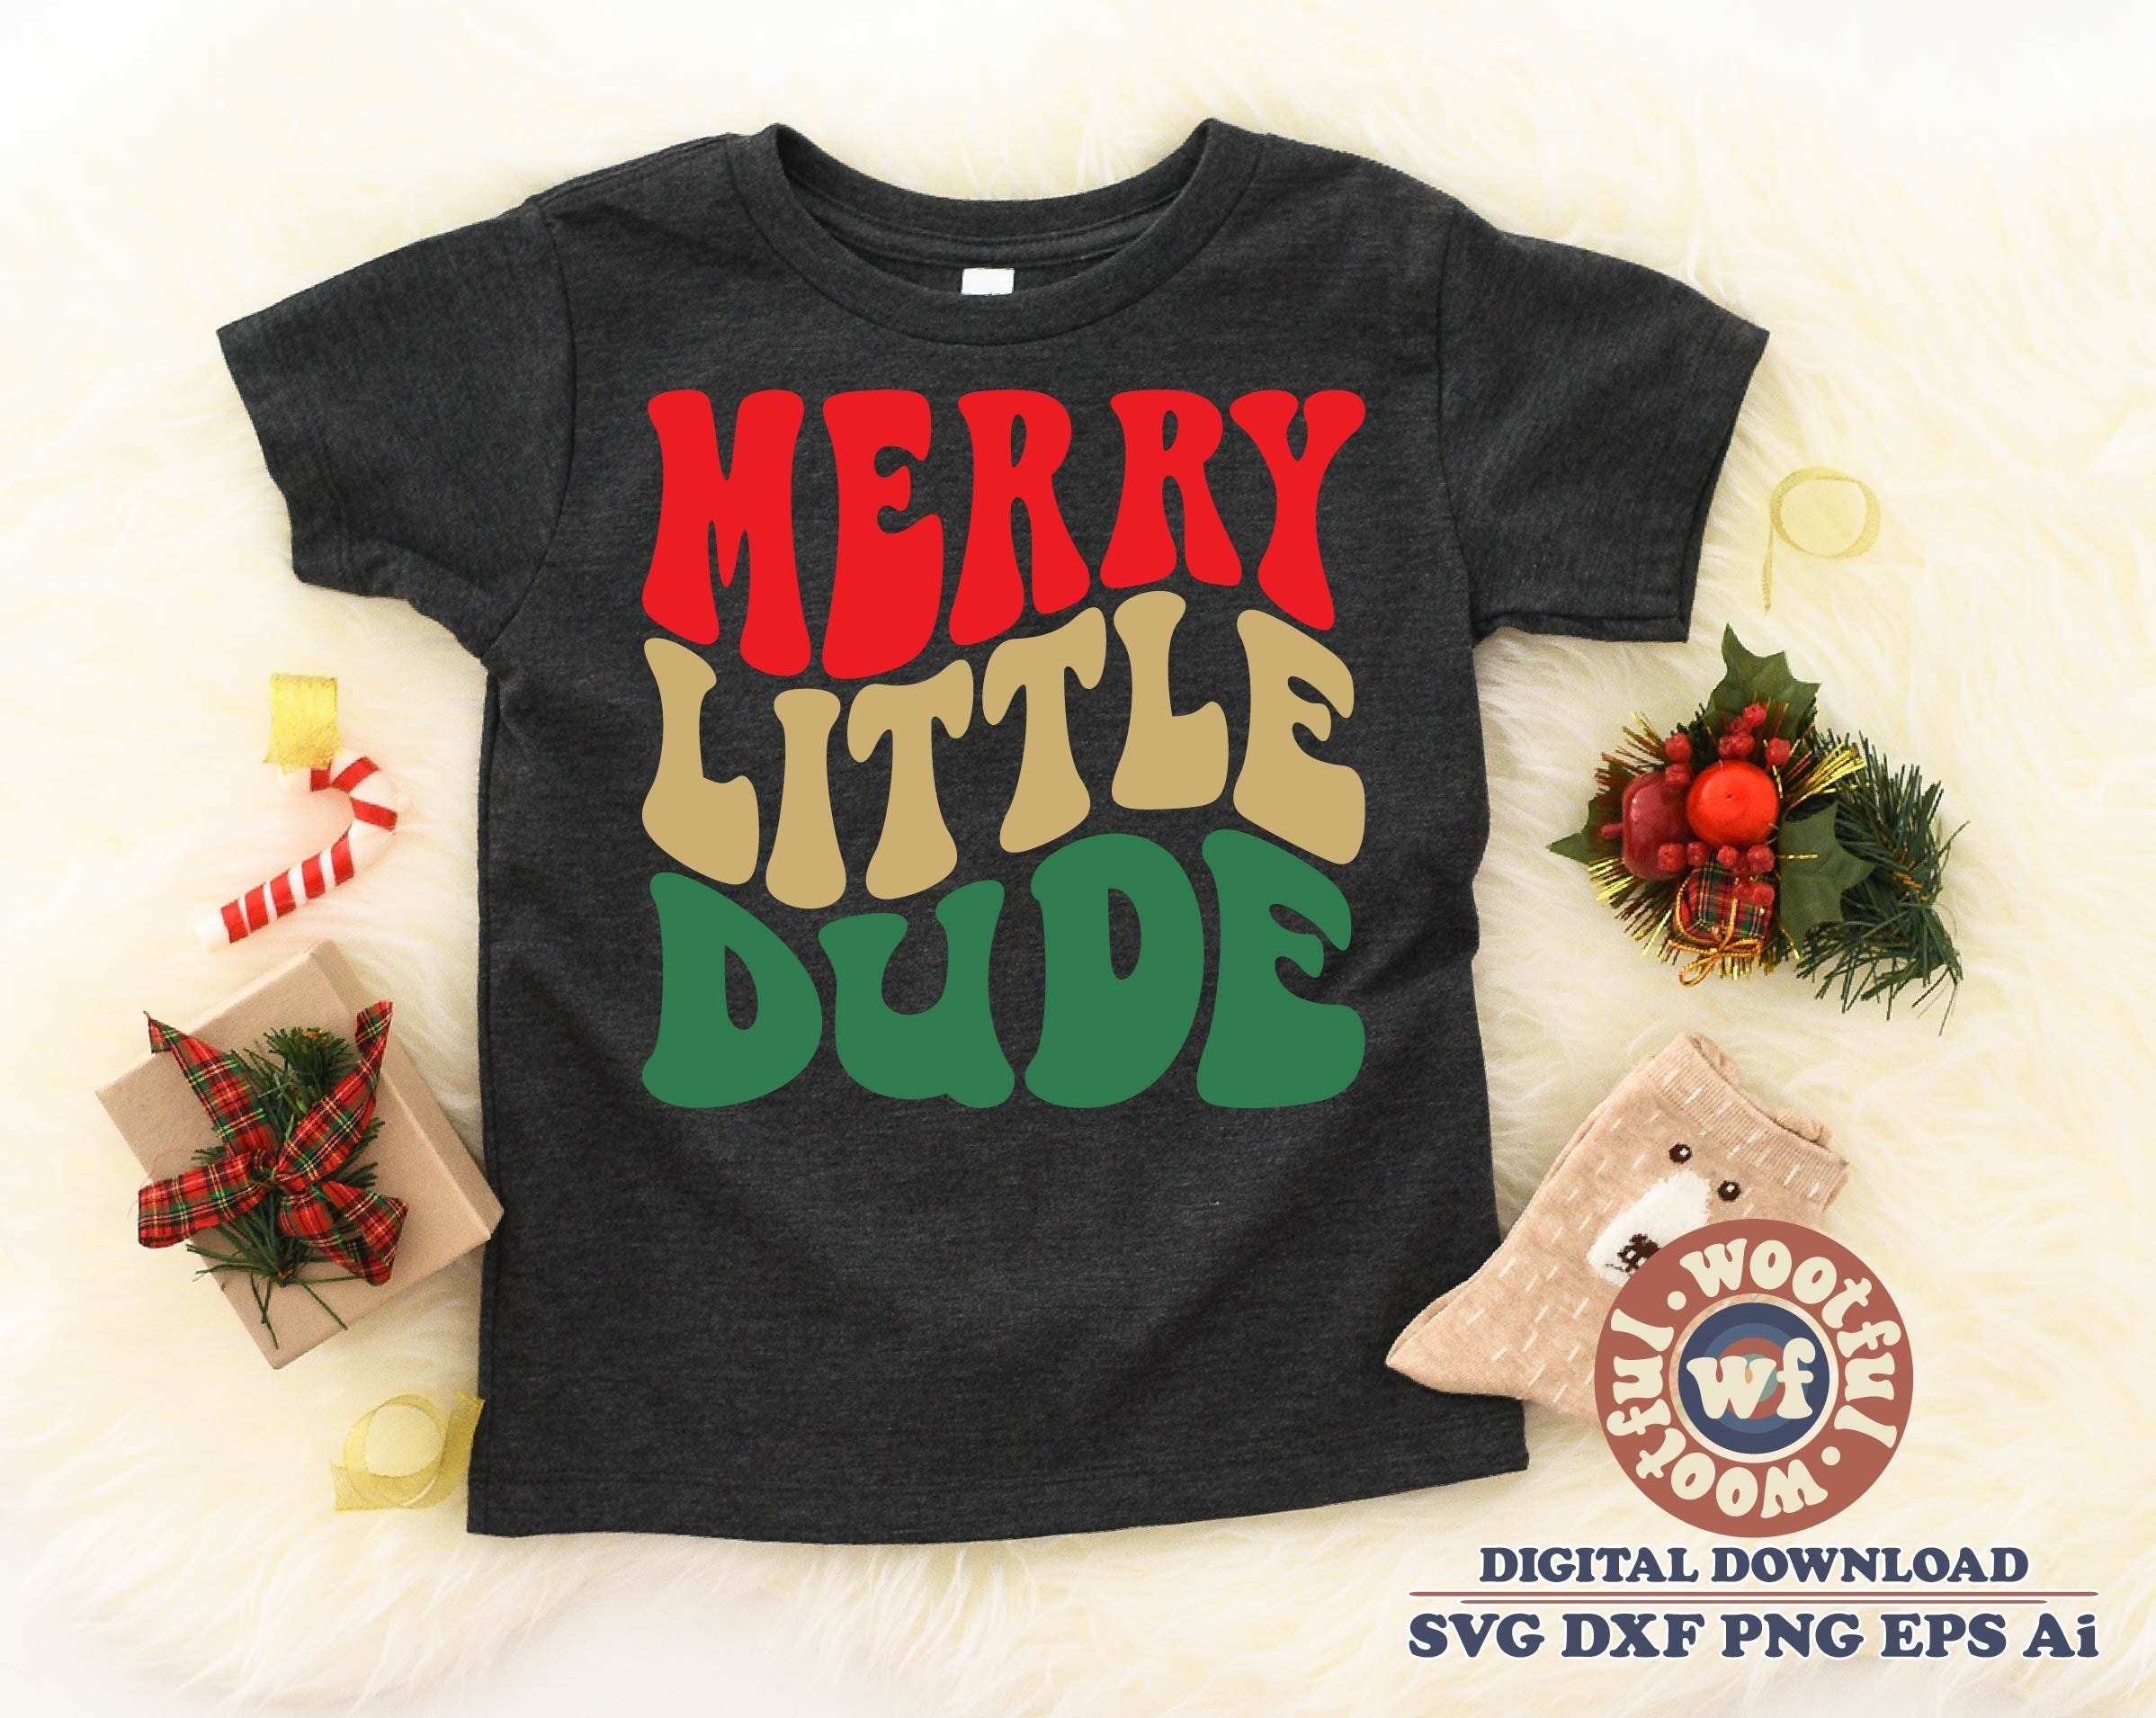 Merry Little Dude svg, Merry and Bright svg, Merry Christmas svg, Winter svg, Wavy Letters svg, Svg Dxf Eps Ai Png Silhouette Cricut